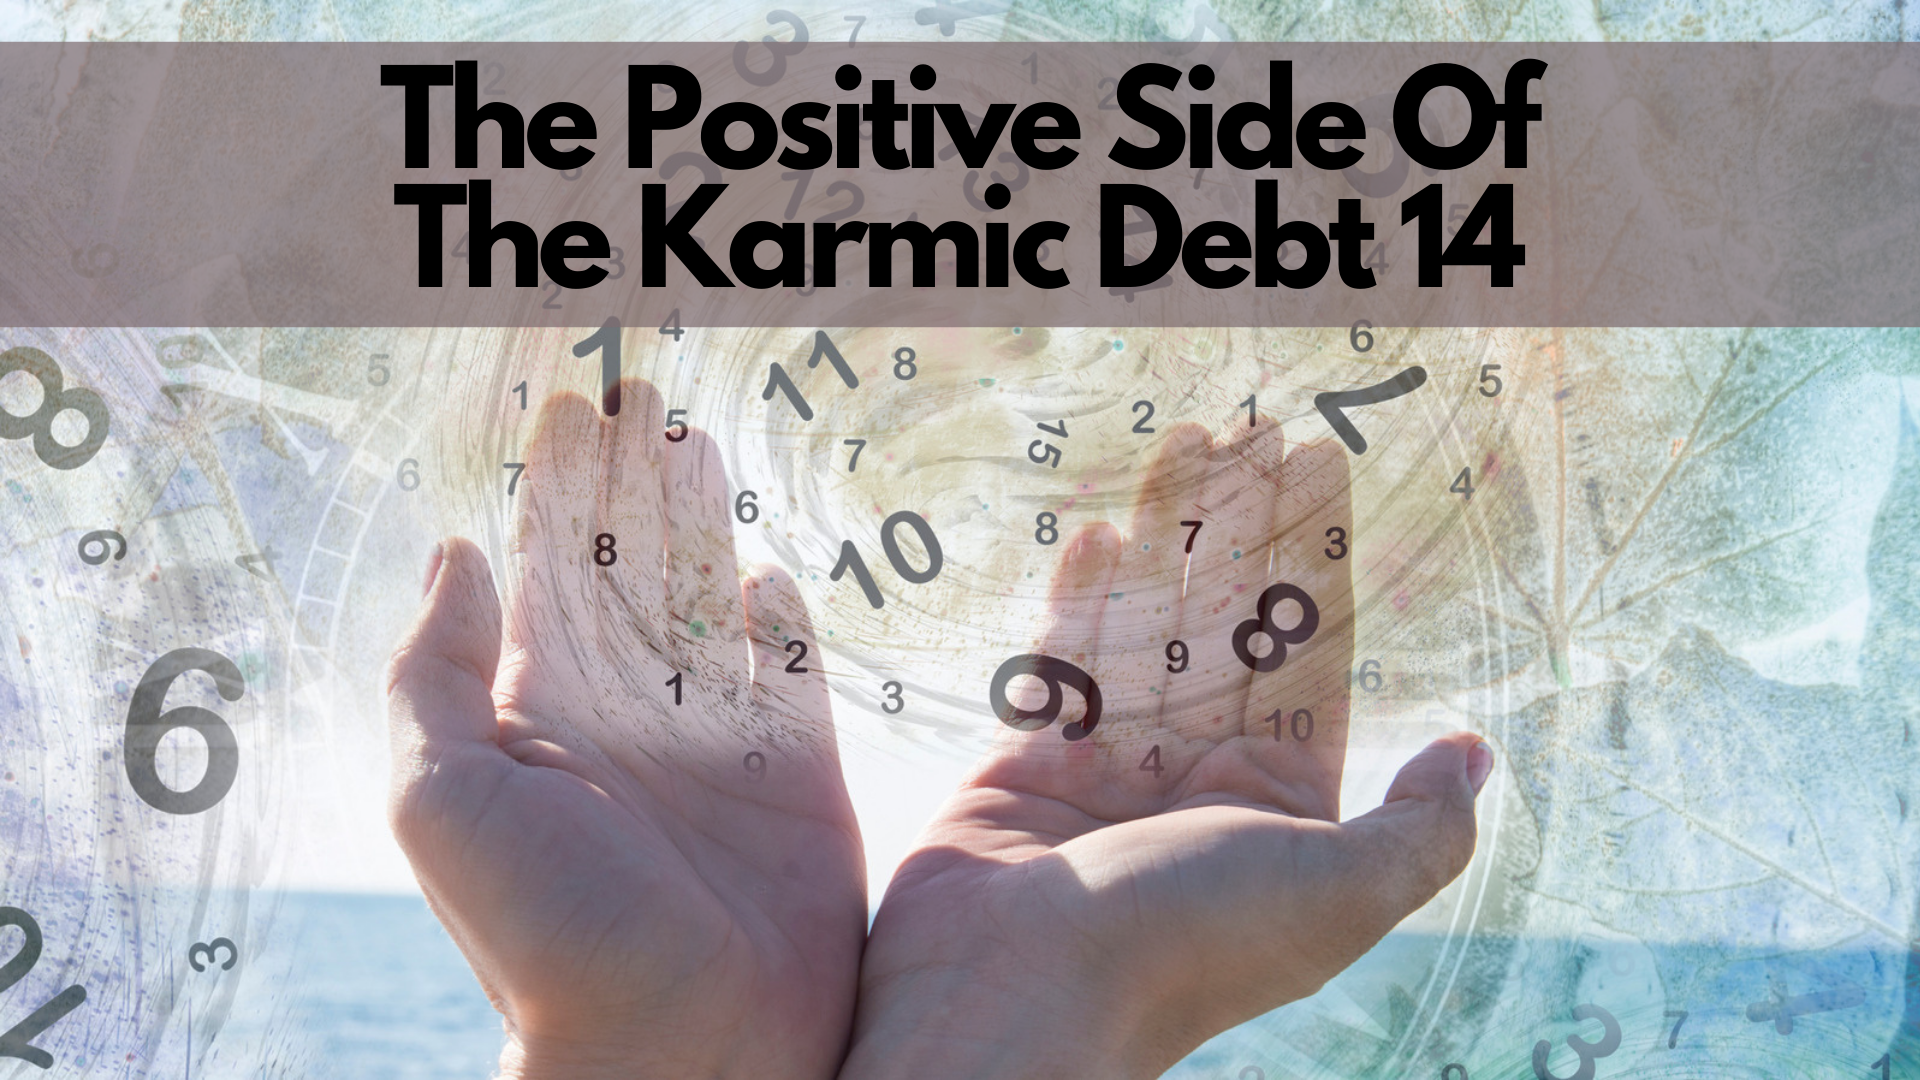 Open hands with numbers and words The Positive Side Of The Karmic Debt 14